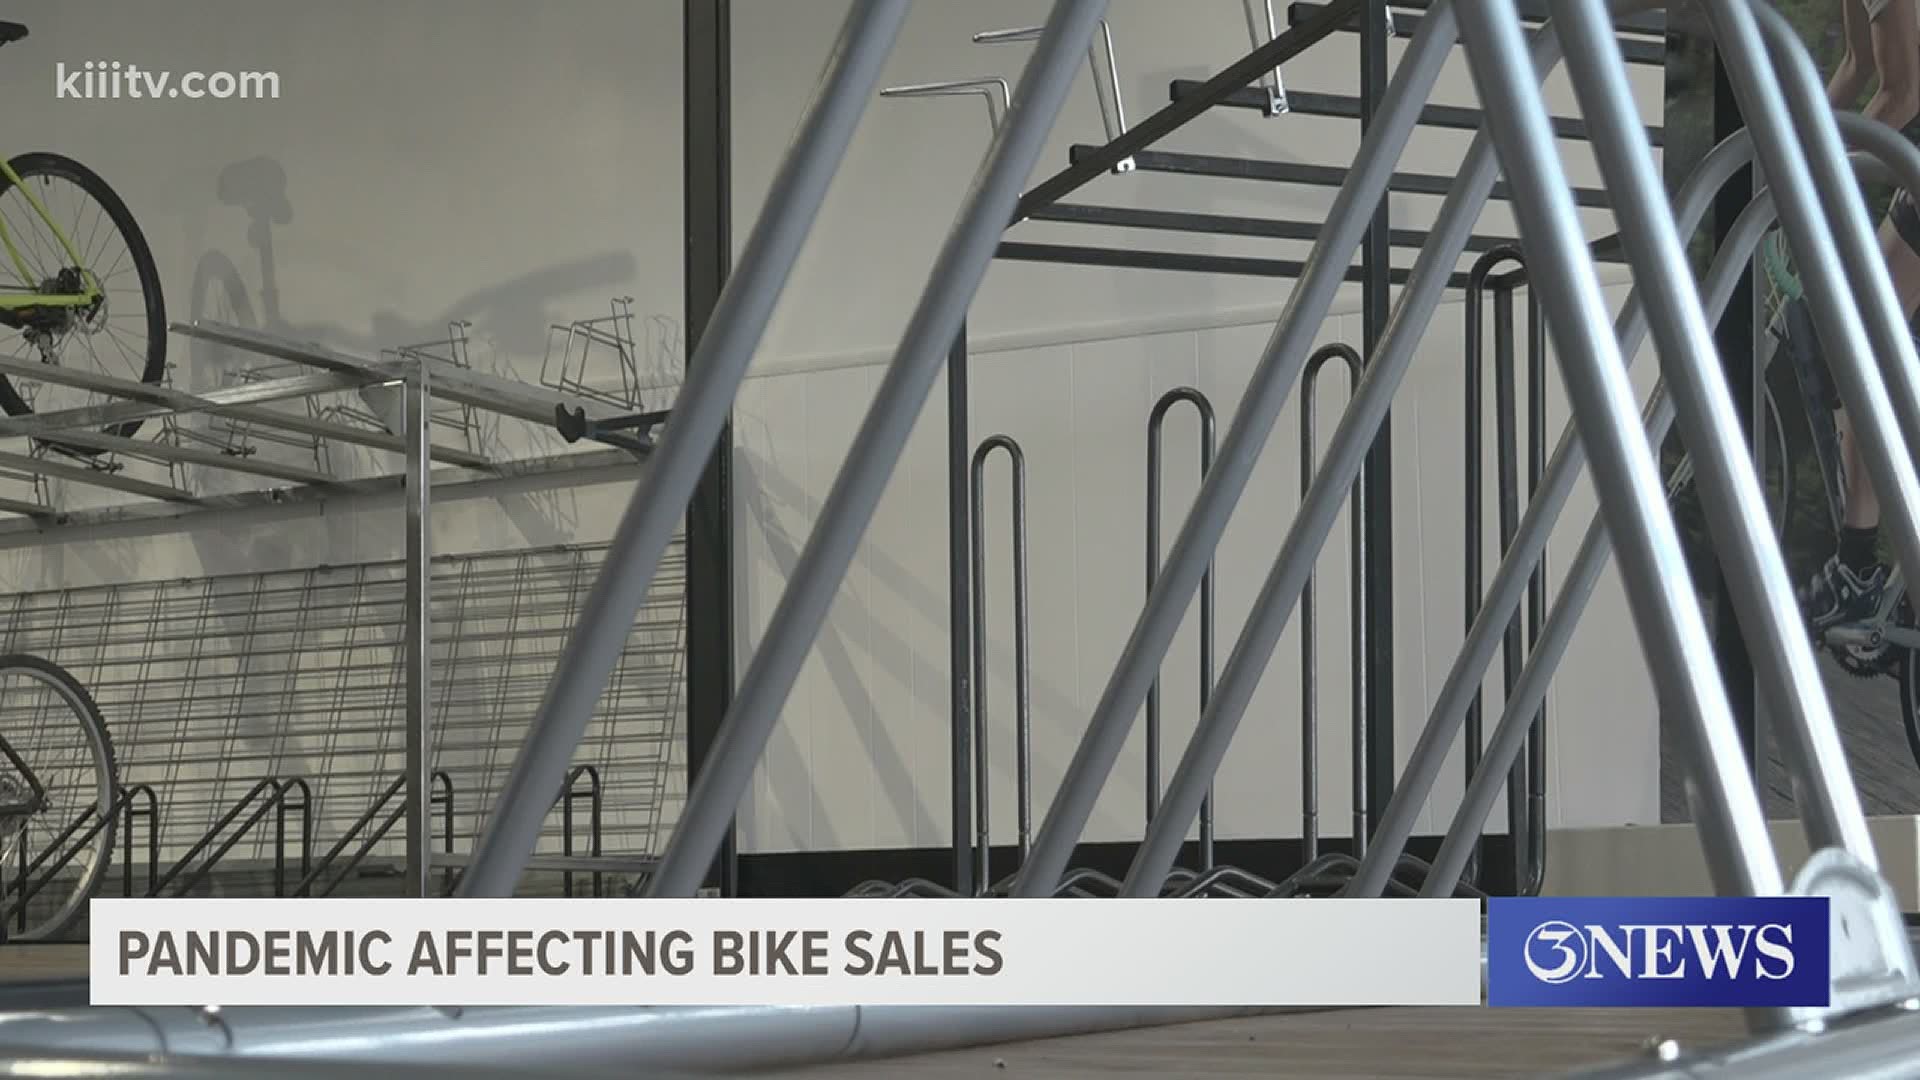 Employees at a local bicycle shop said bikes remain in high demand during the COVID-19 pandemic but parts from suppliers overseas are running low.